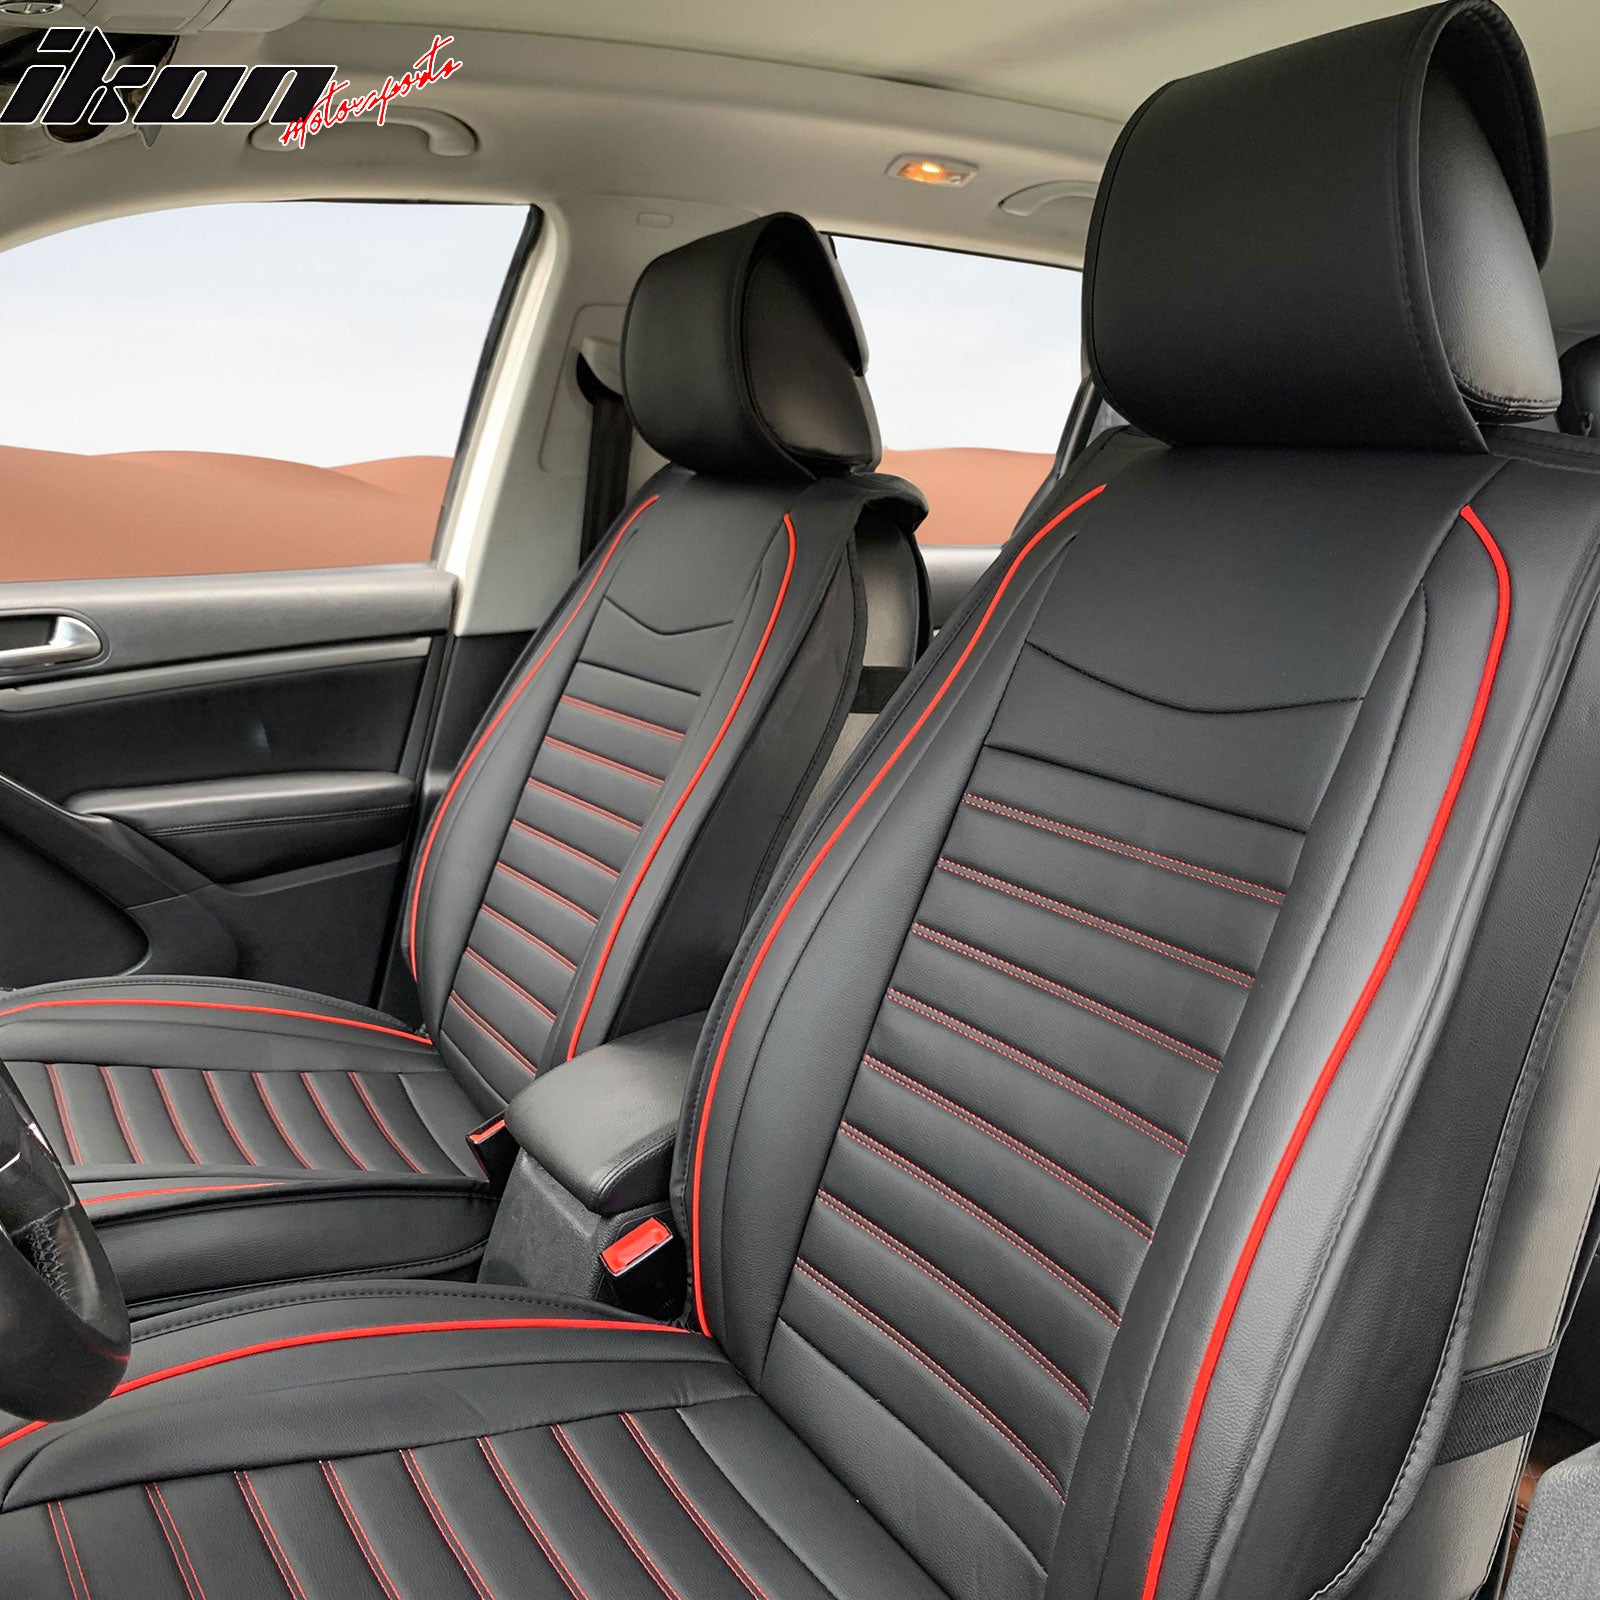 Universal Black & Red Stitching Car Seat Covers PU Leather - 02 Style (Front)